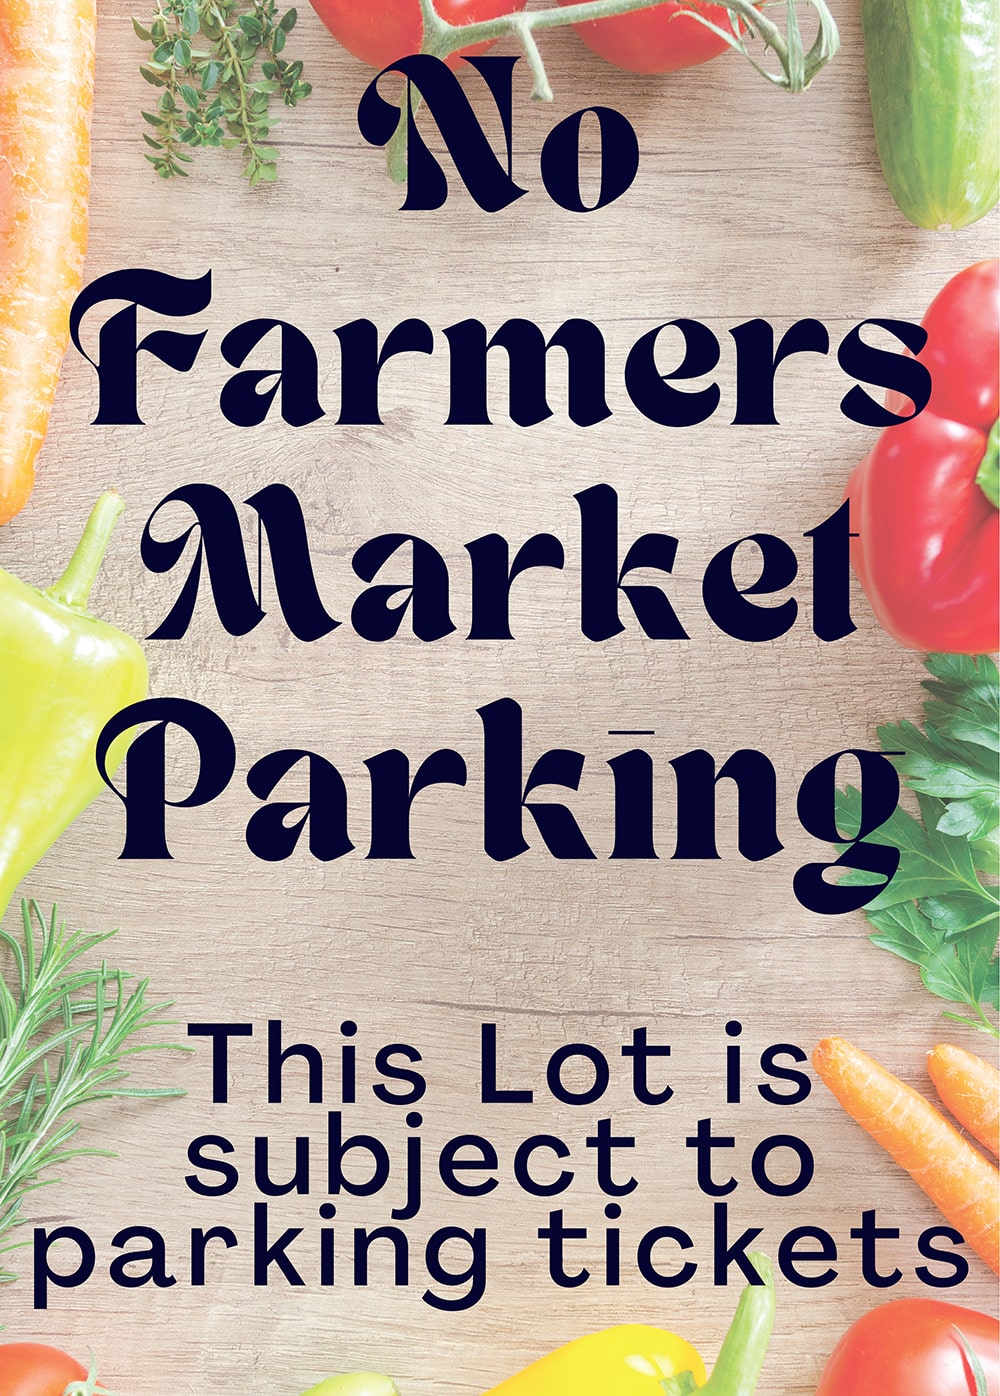 No Farmers Market Parking - This lot is subject to parking tickets